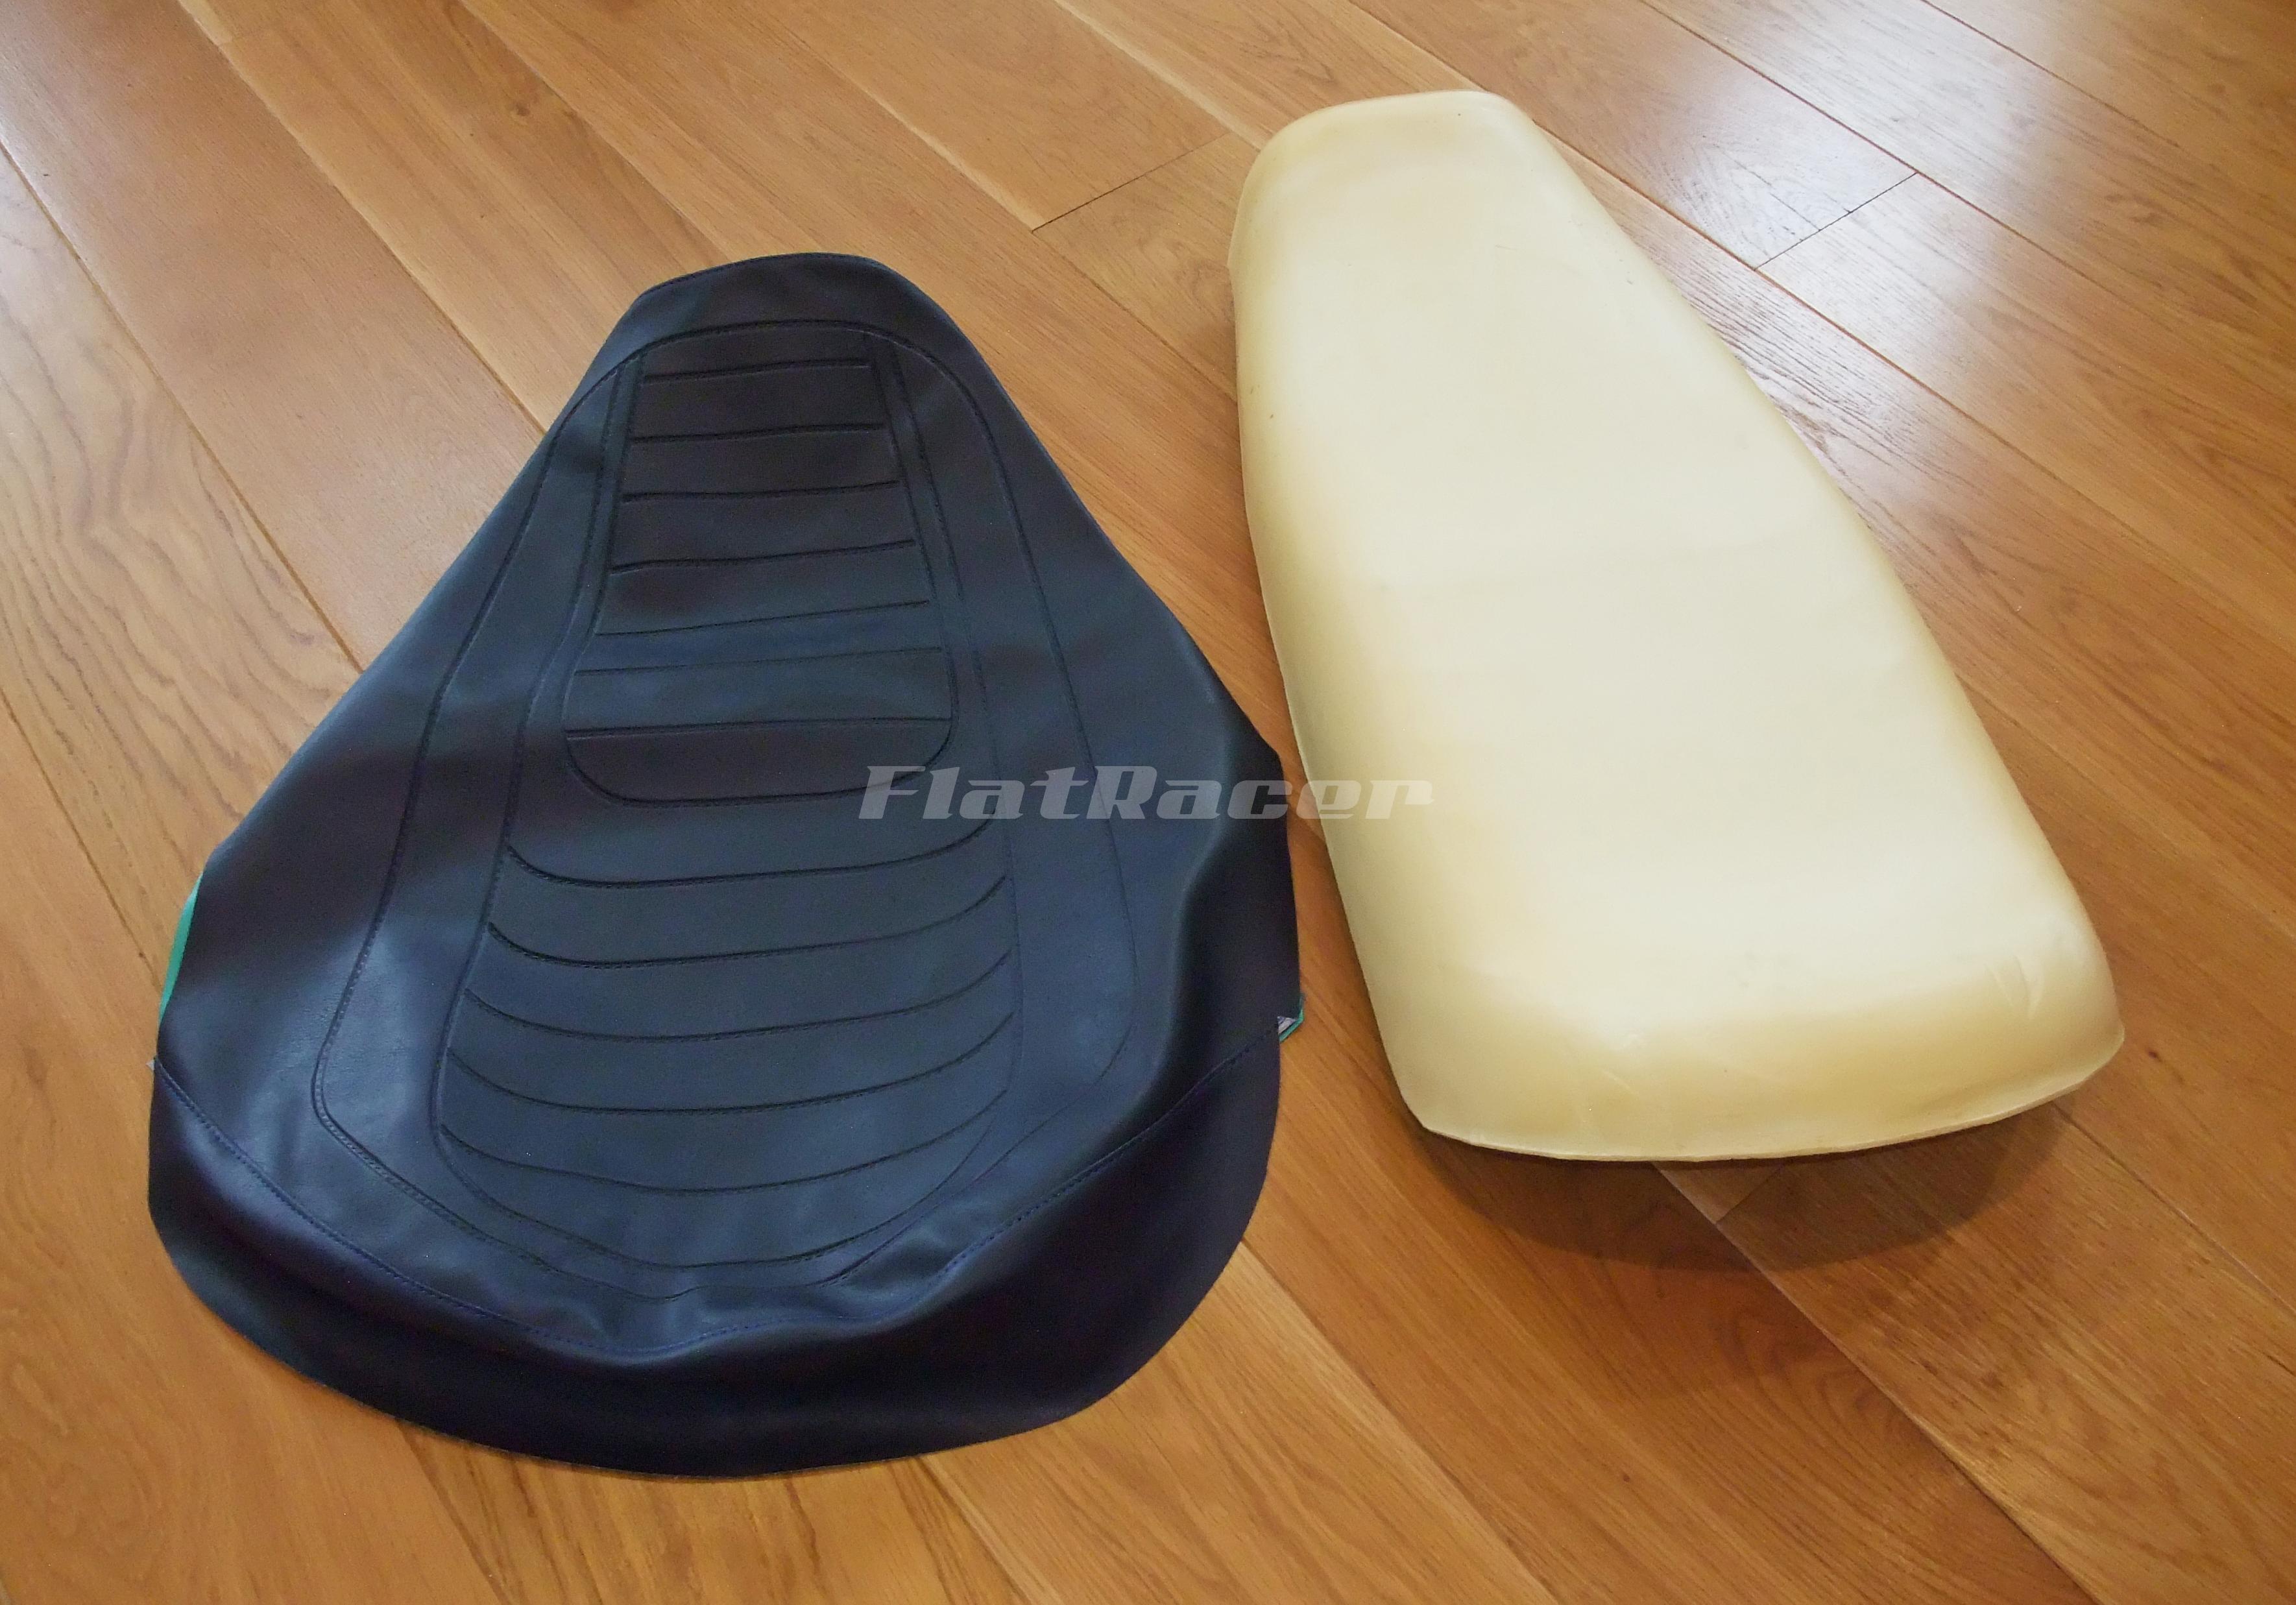 FlatRacer BMW R100 RS Motorsport blue (1978) dual seat replacement seat cover + foam - BLUE